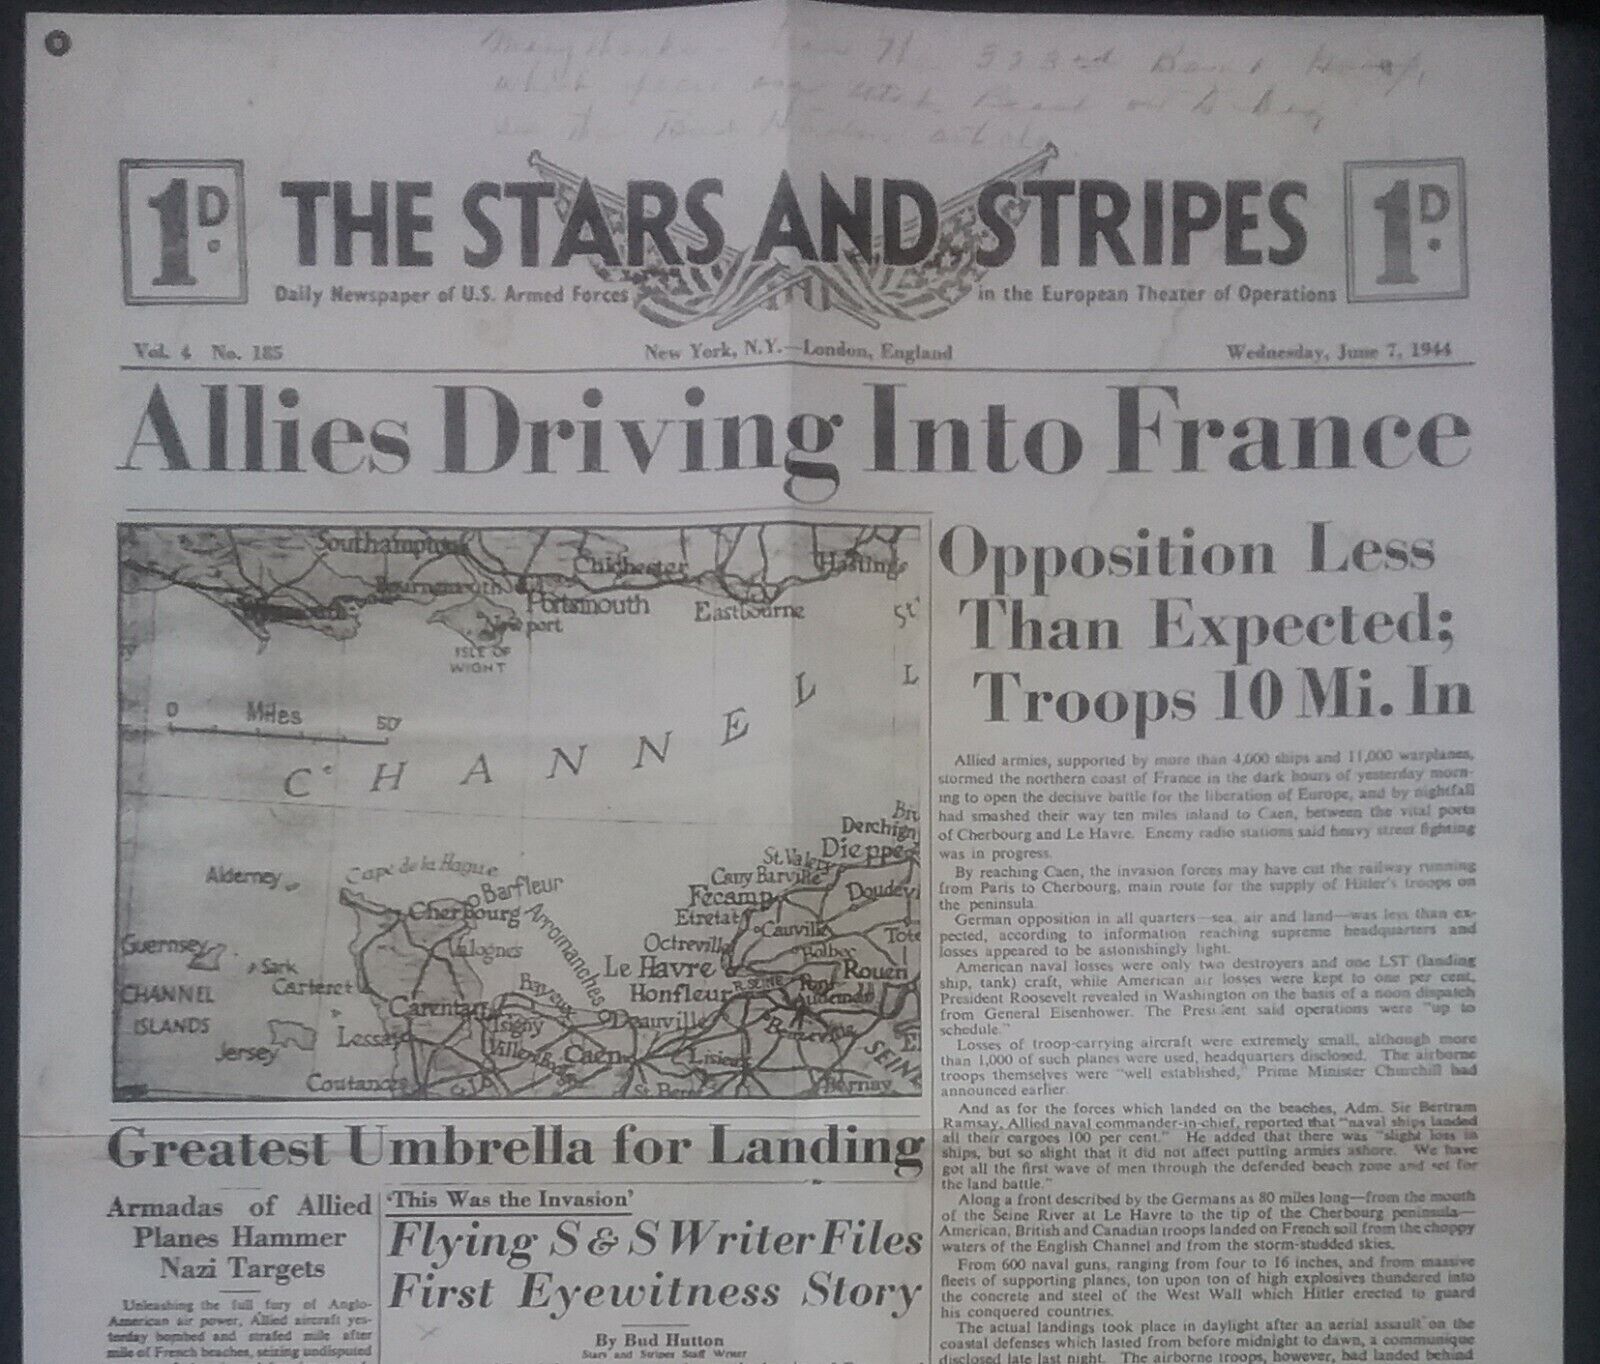 WW2 D-DAY  DAILY NEWSPAPER OF U.S. ARMED FORCES , WED JUNE 7TH 1944 *((1 page))*